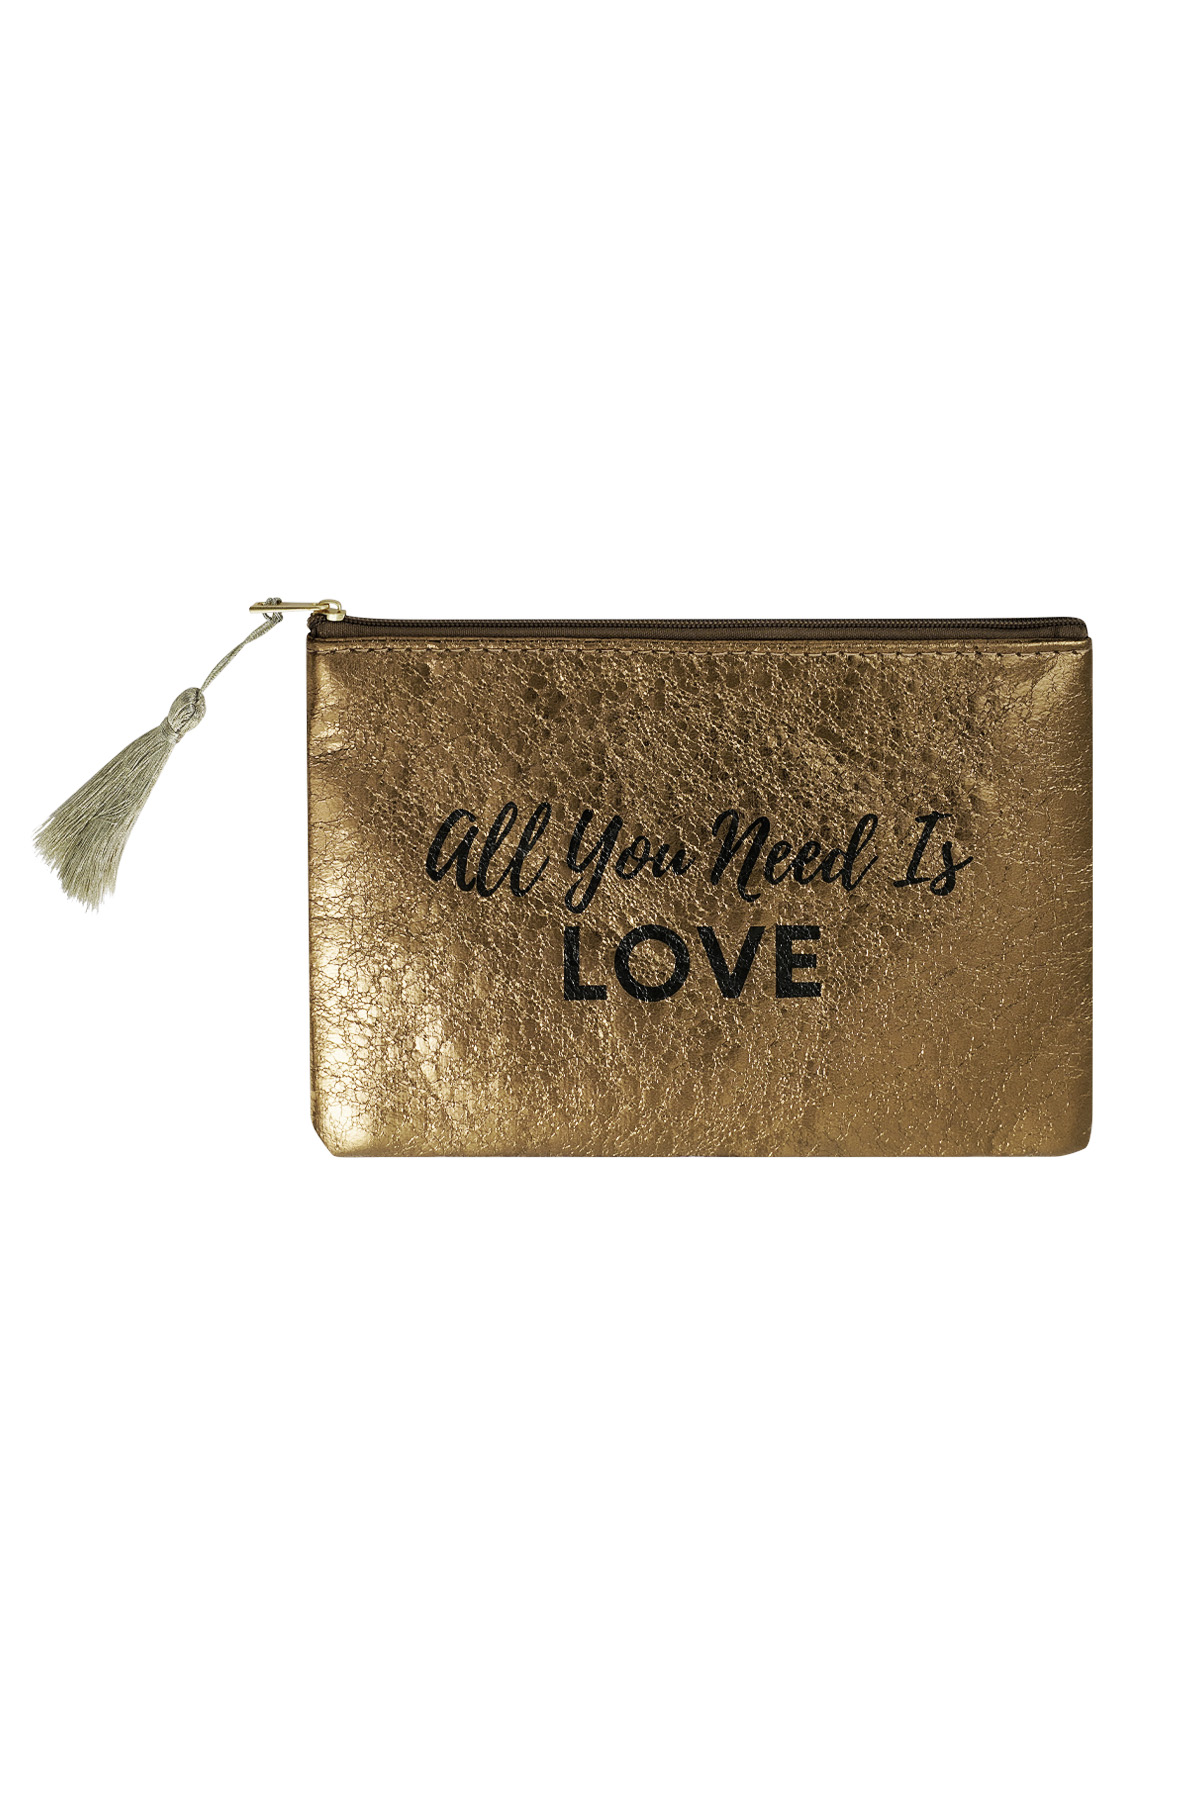 Make-up tas metallic all you need is love - bruin h5 